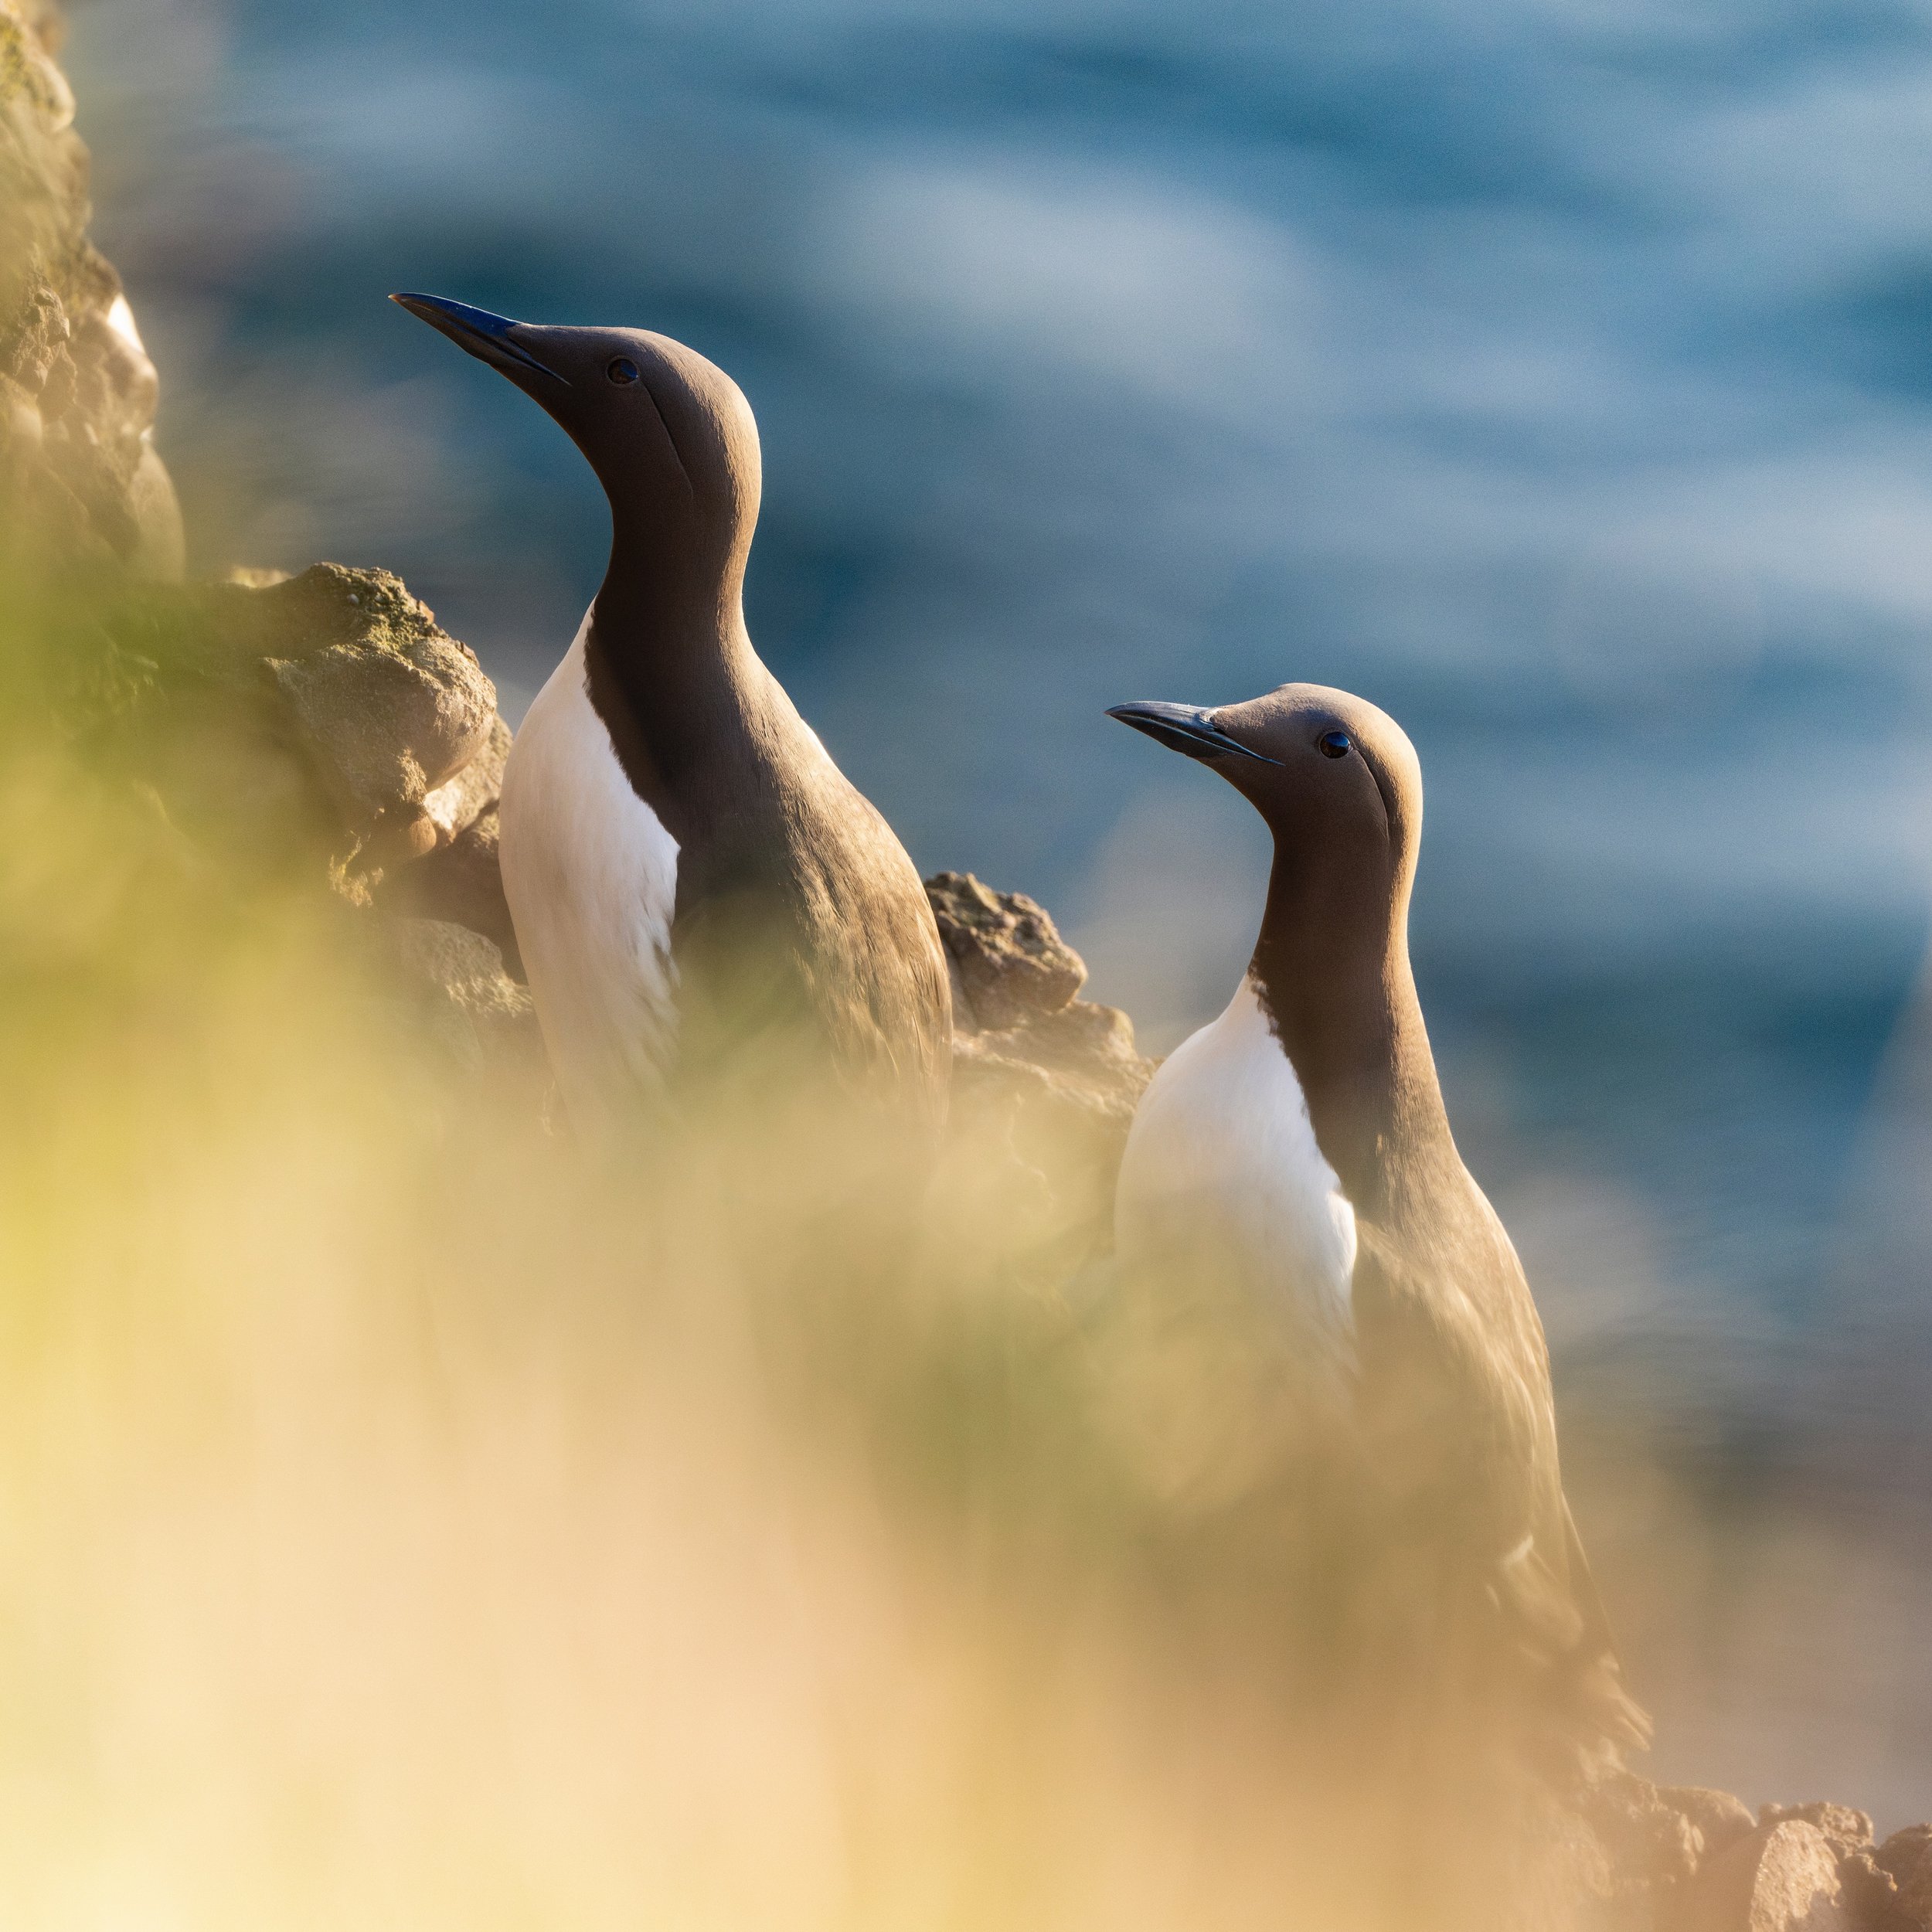 Along with the razorbills, guillemots nest in the sheer cliffs at RSPB Fowlsheugh. They&rsquo;re part of the same bird tribe - Alcini - which makes sense when you see them side by side, not only living in close proximity, but for their looks. There a